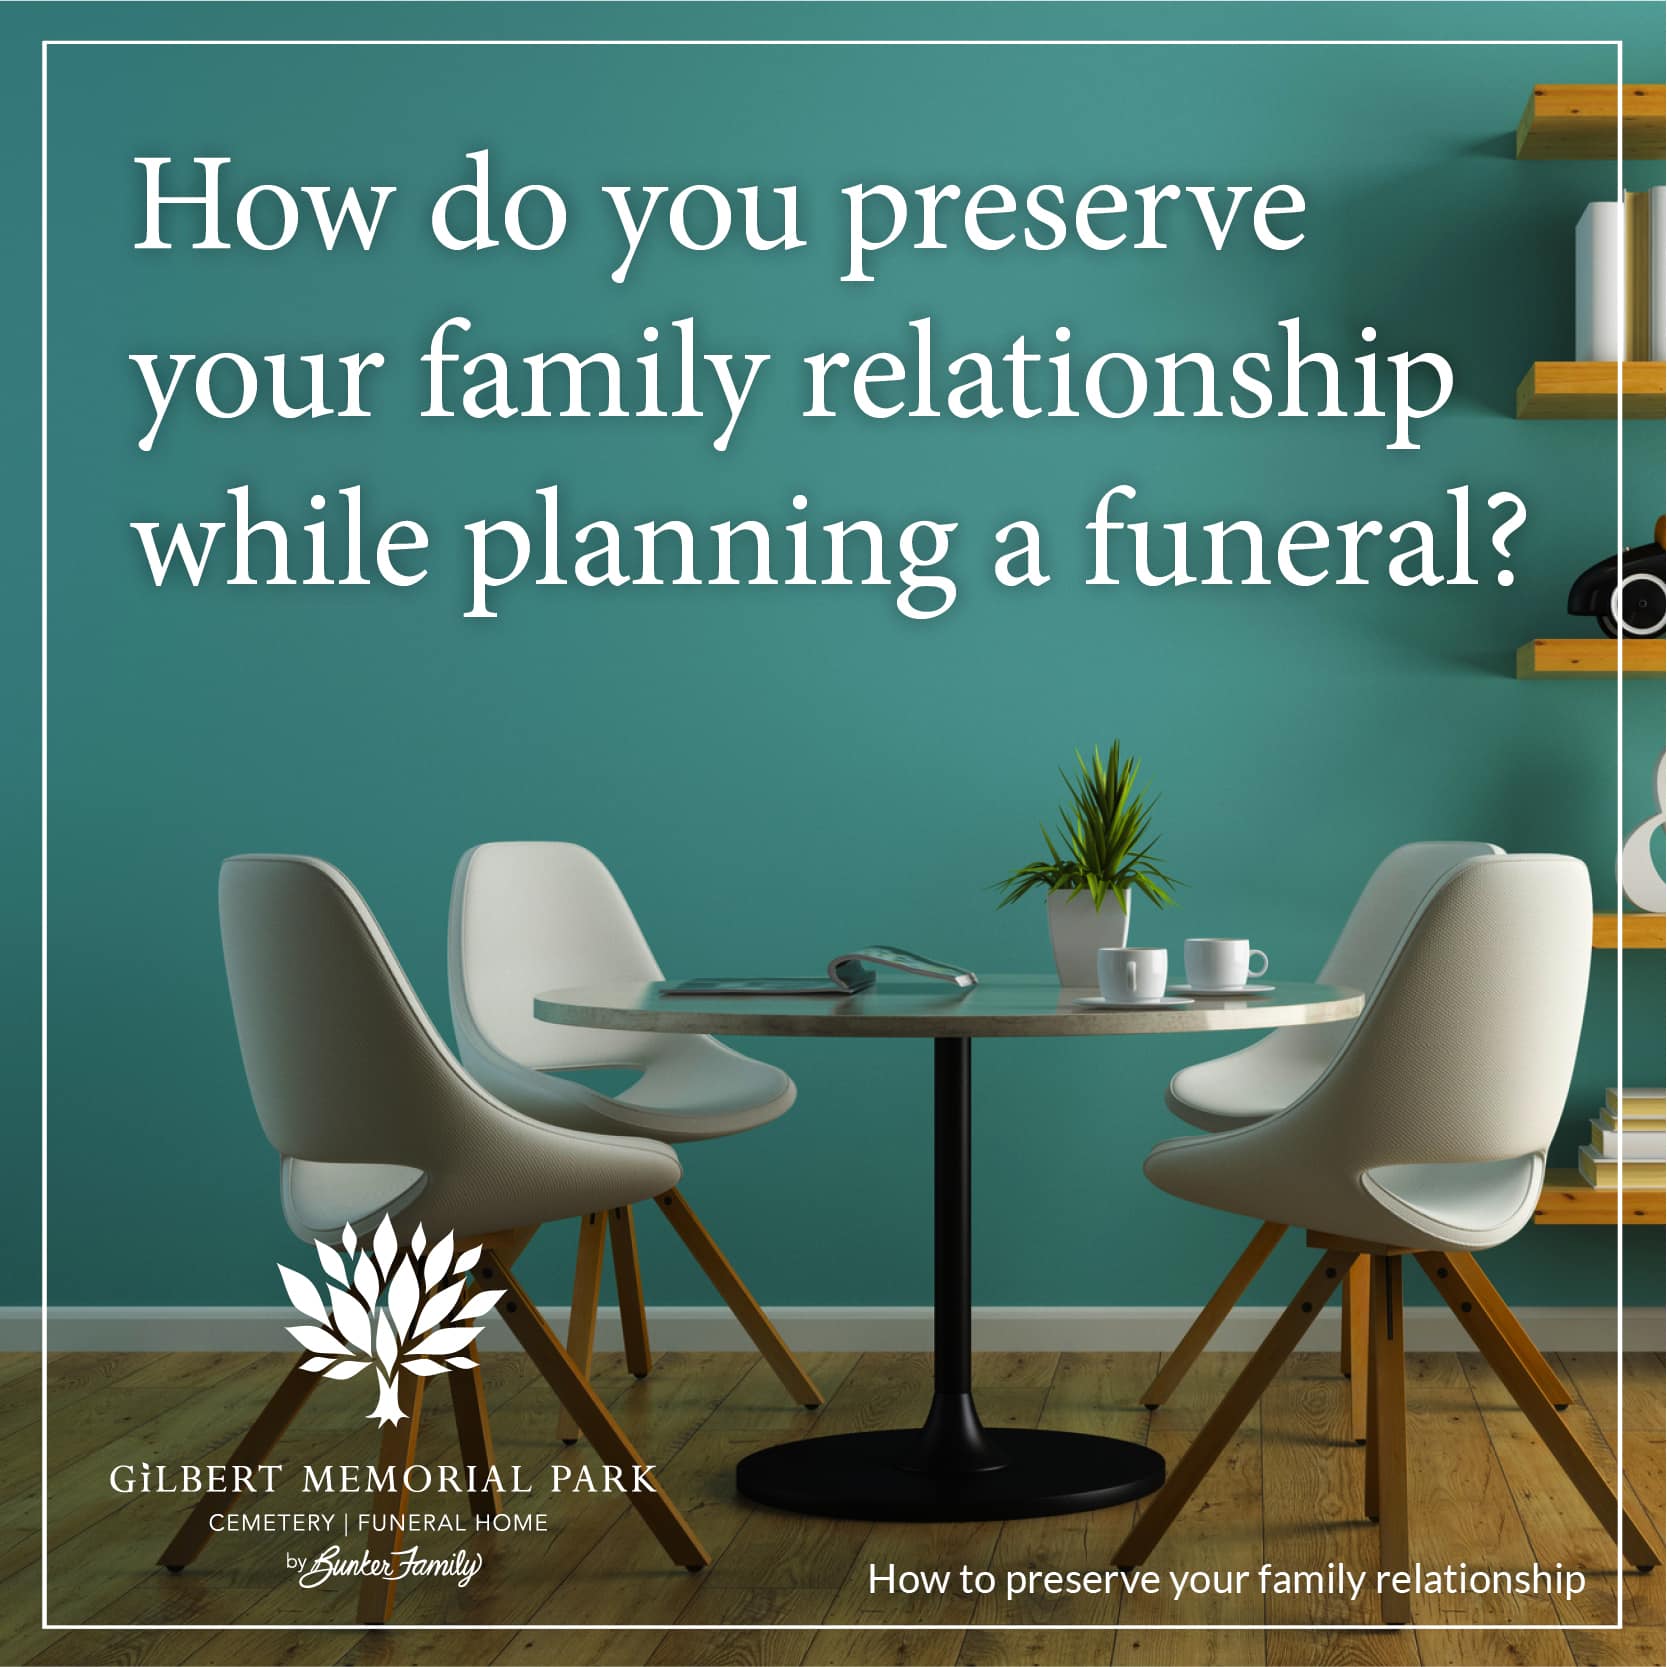 We All Love in Very Different Ways:  Preserving the Family Relationship While Planning a Funeral